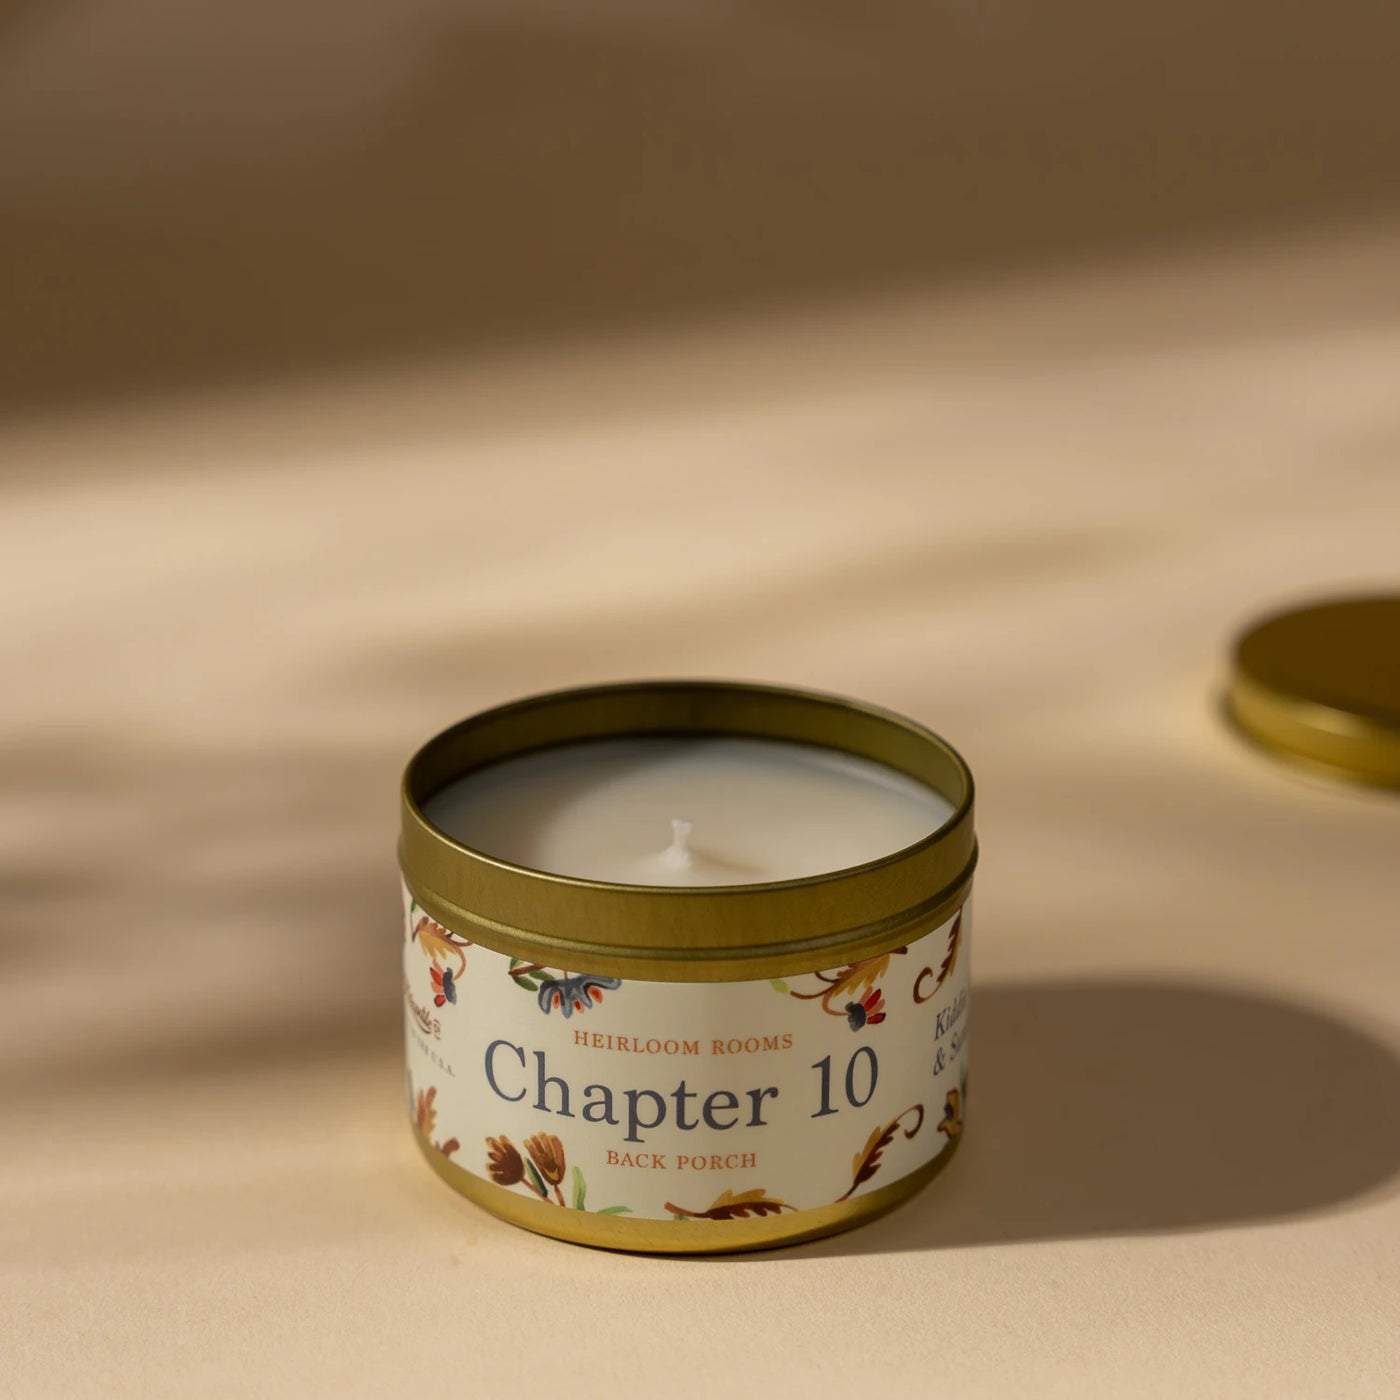 Chapter 10 - Back Porch 5 oz. Candle